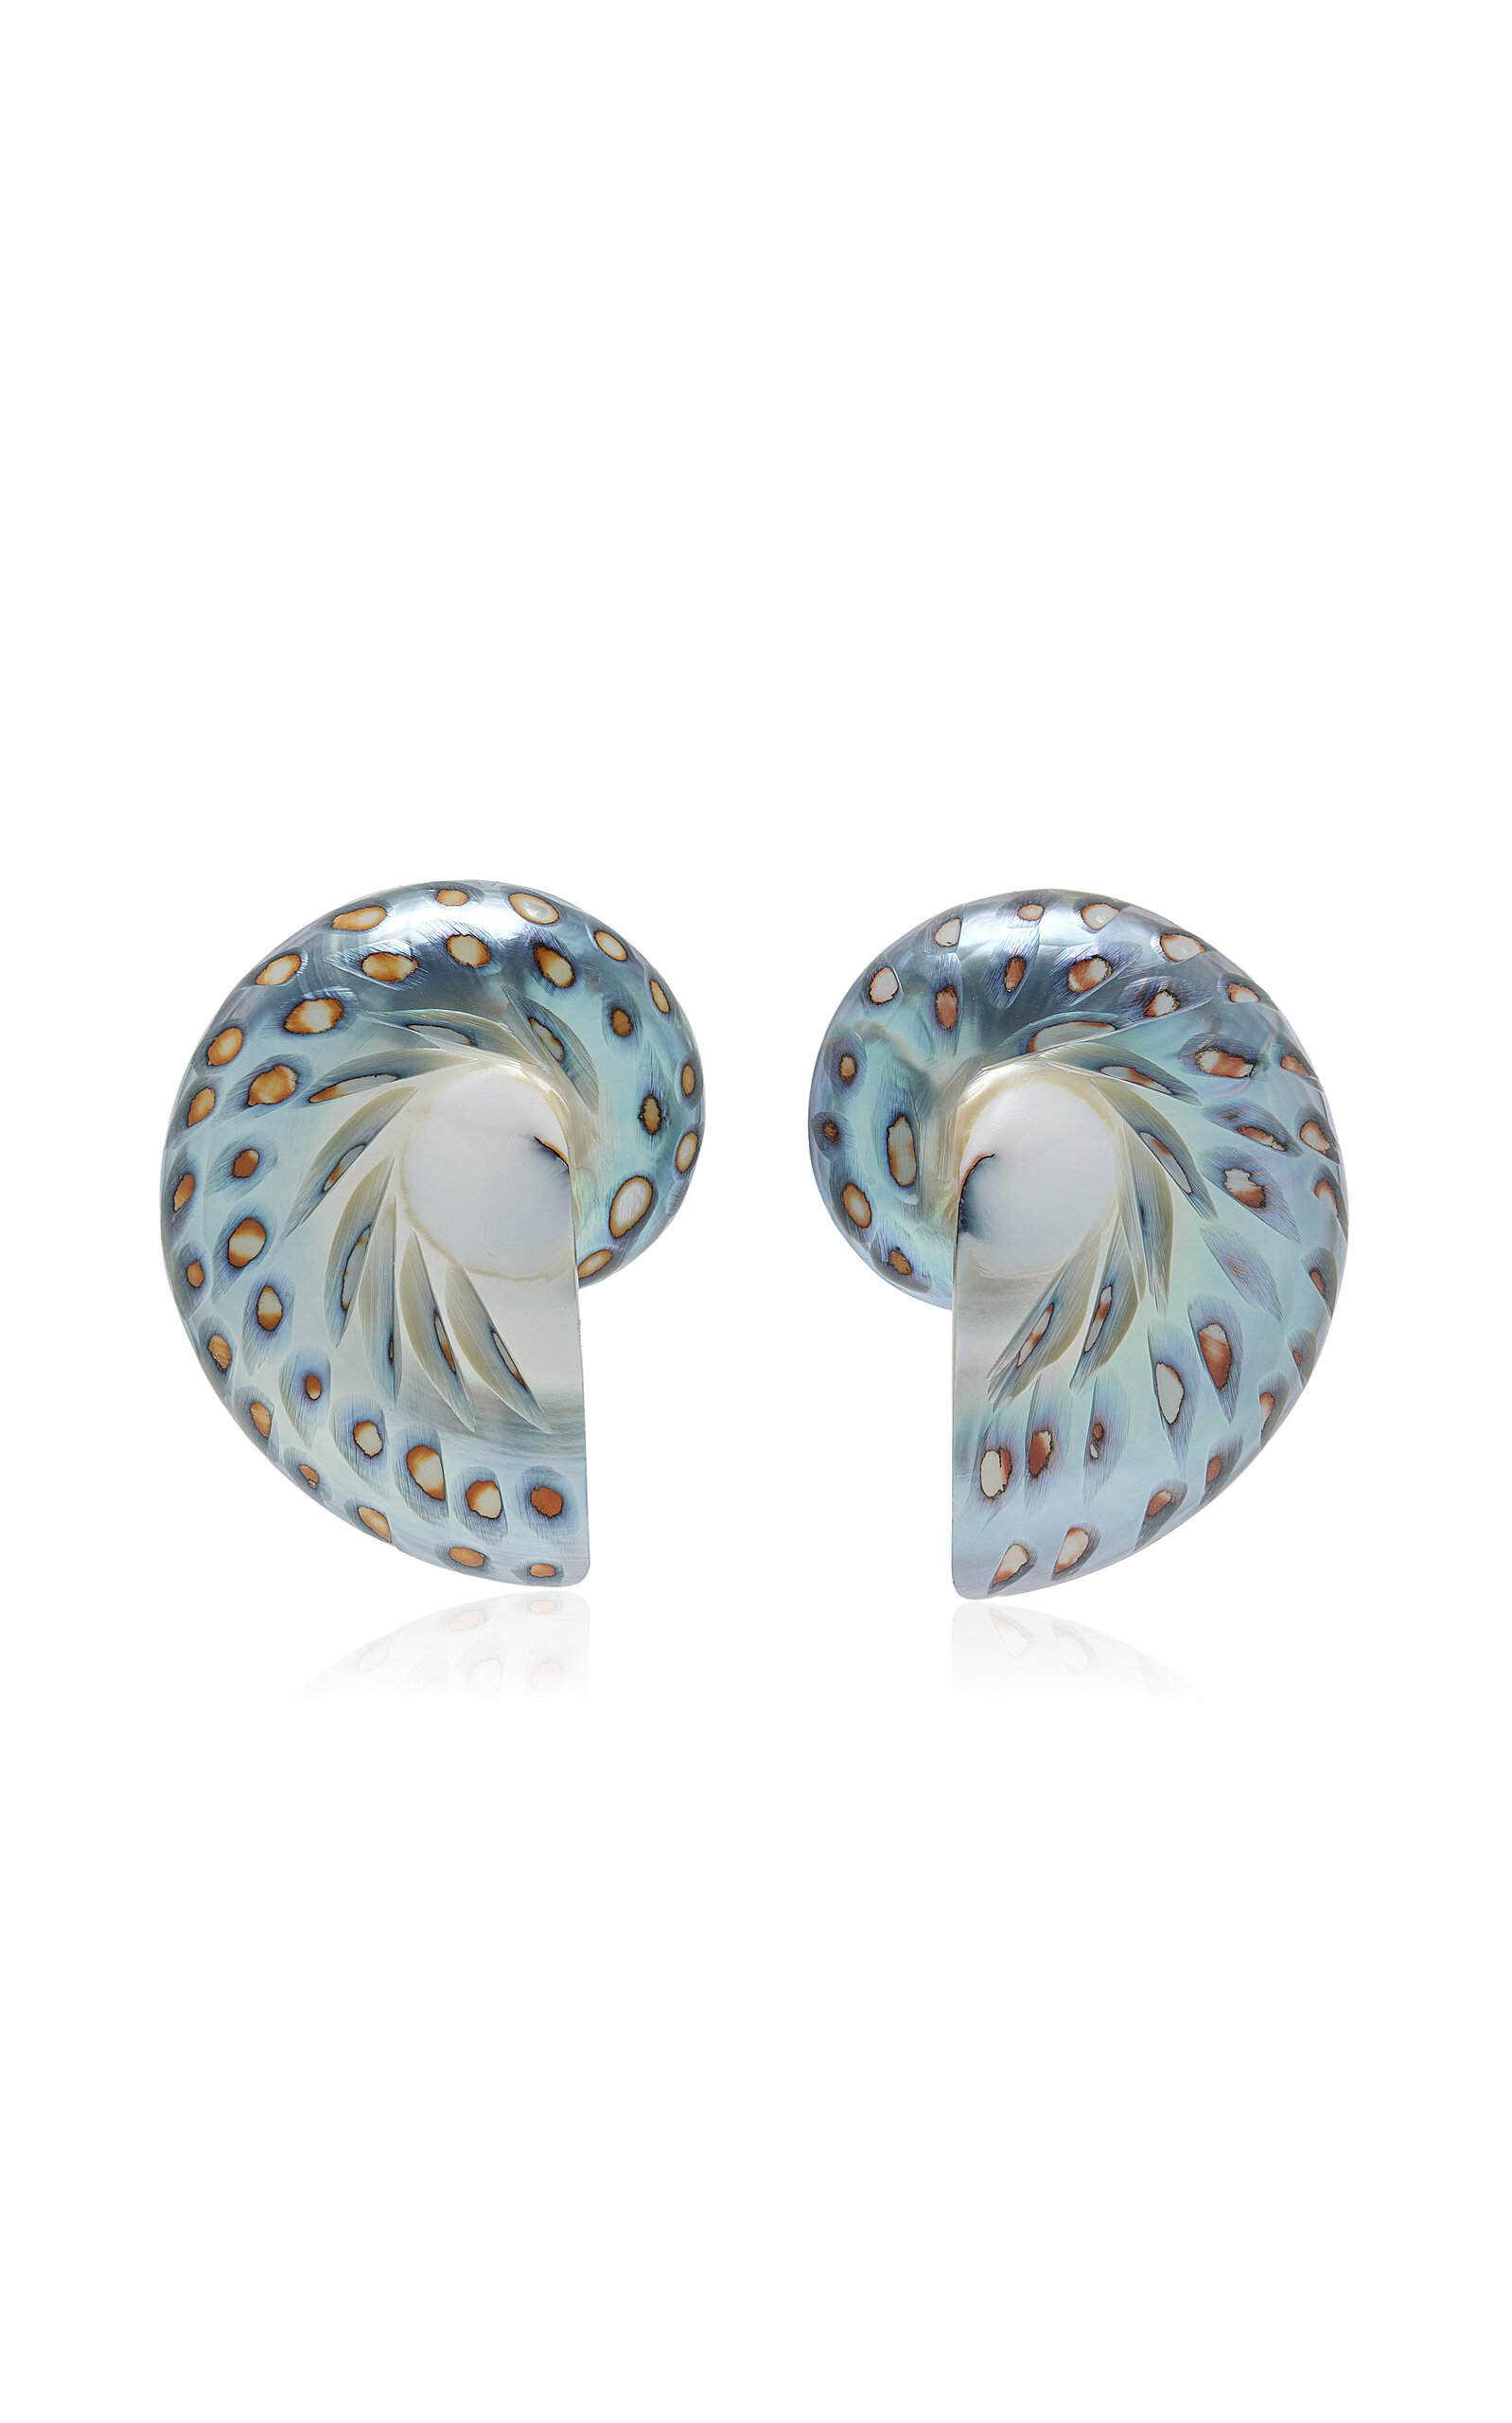 Exclusive Nautilus Shell Earrings